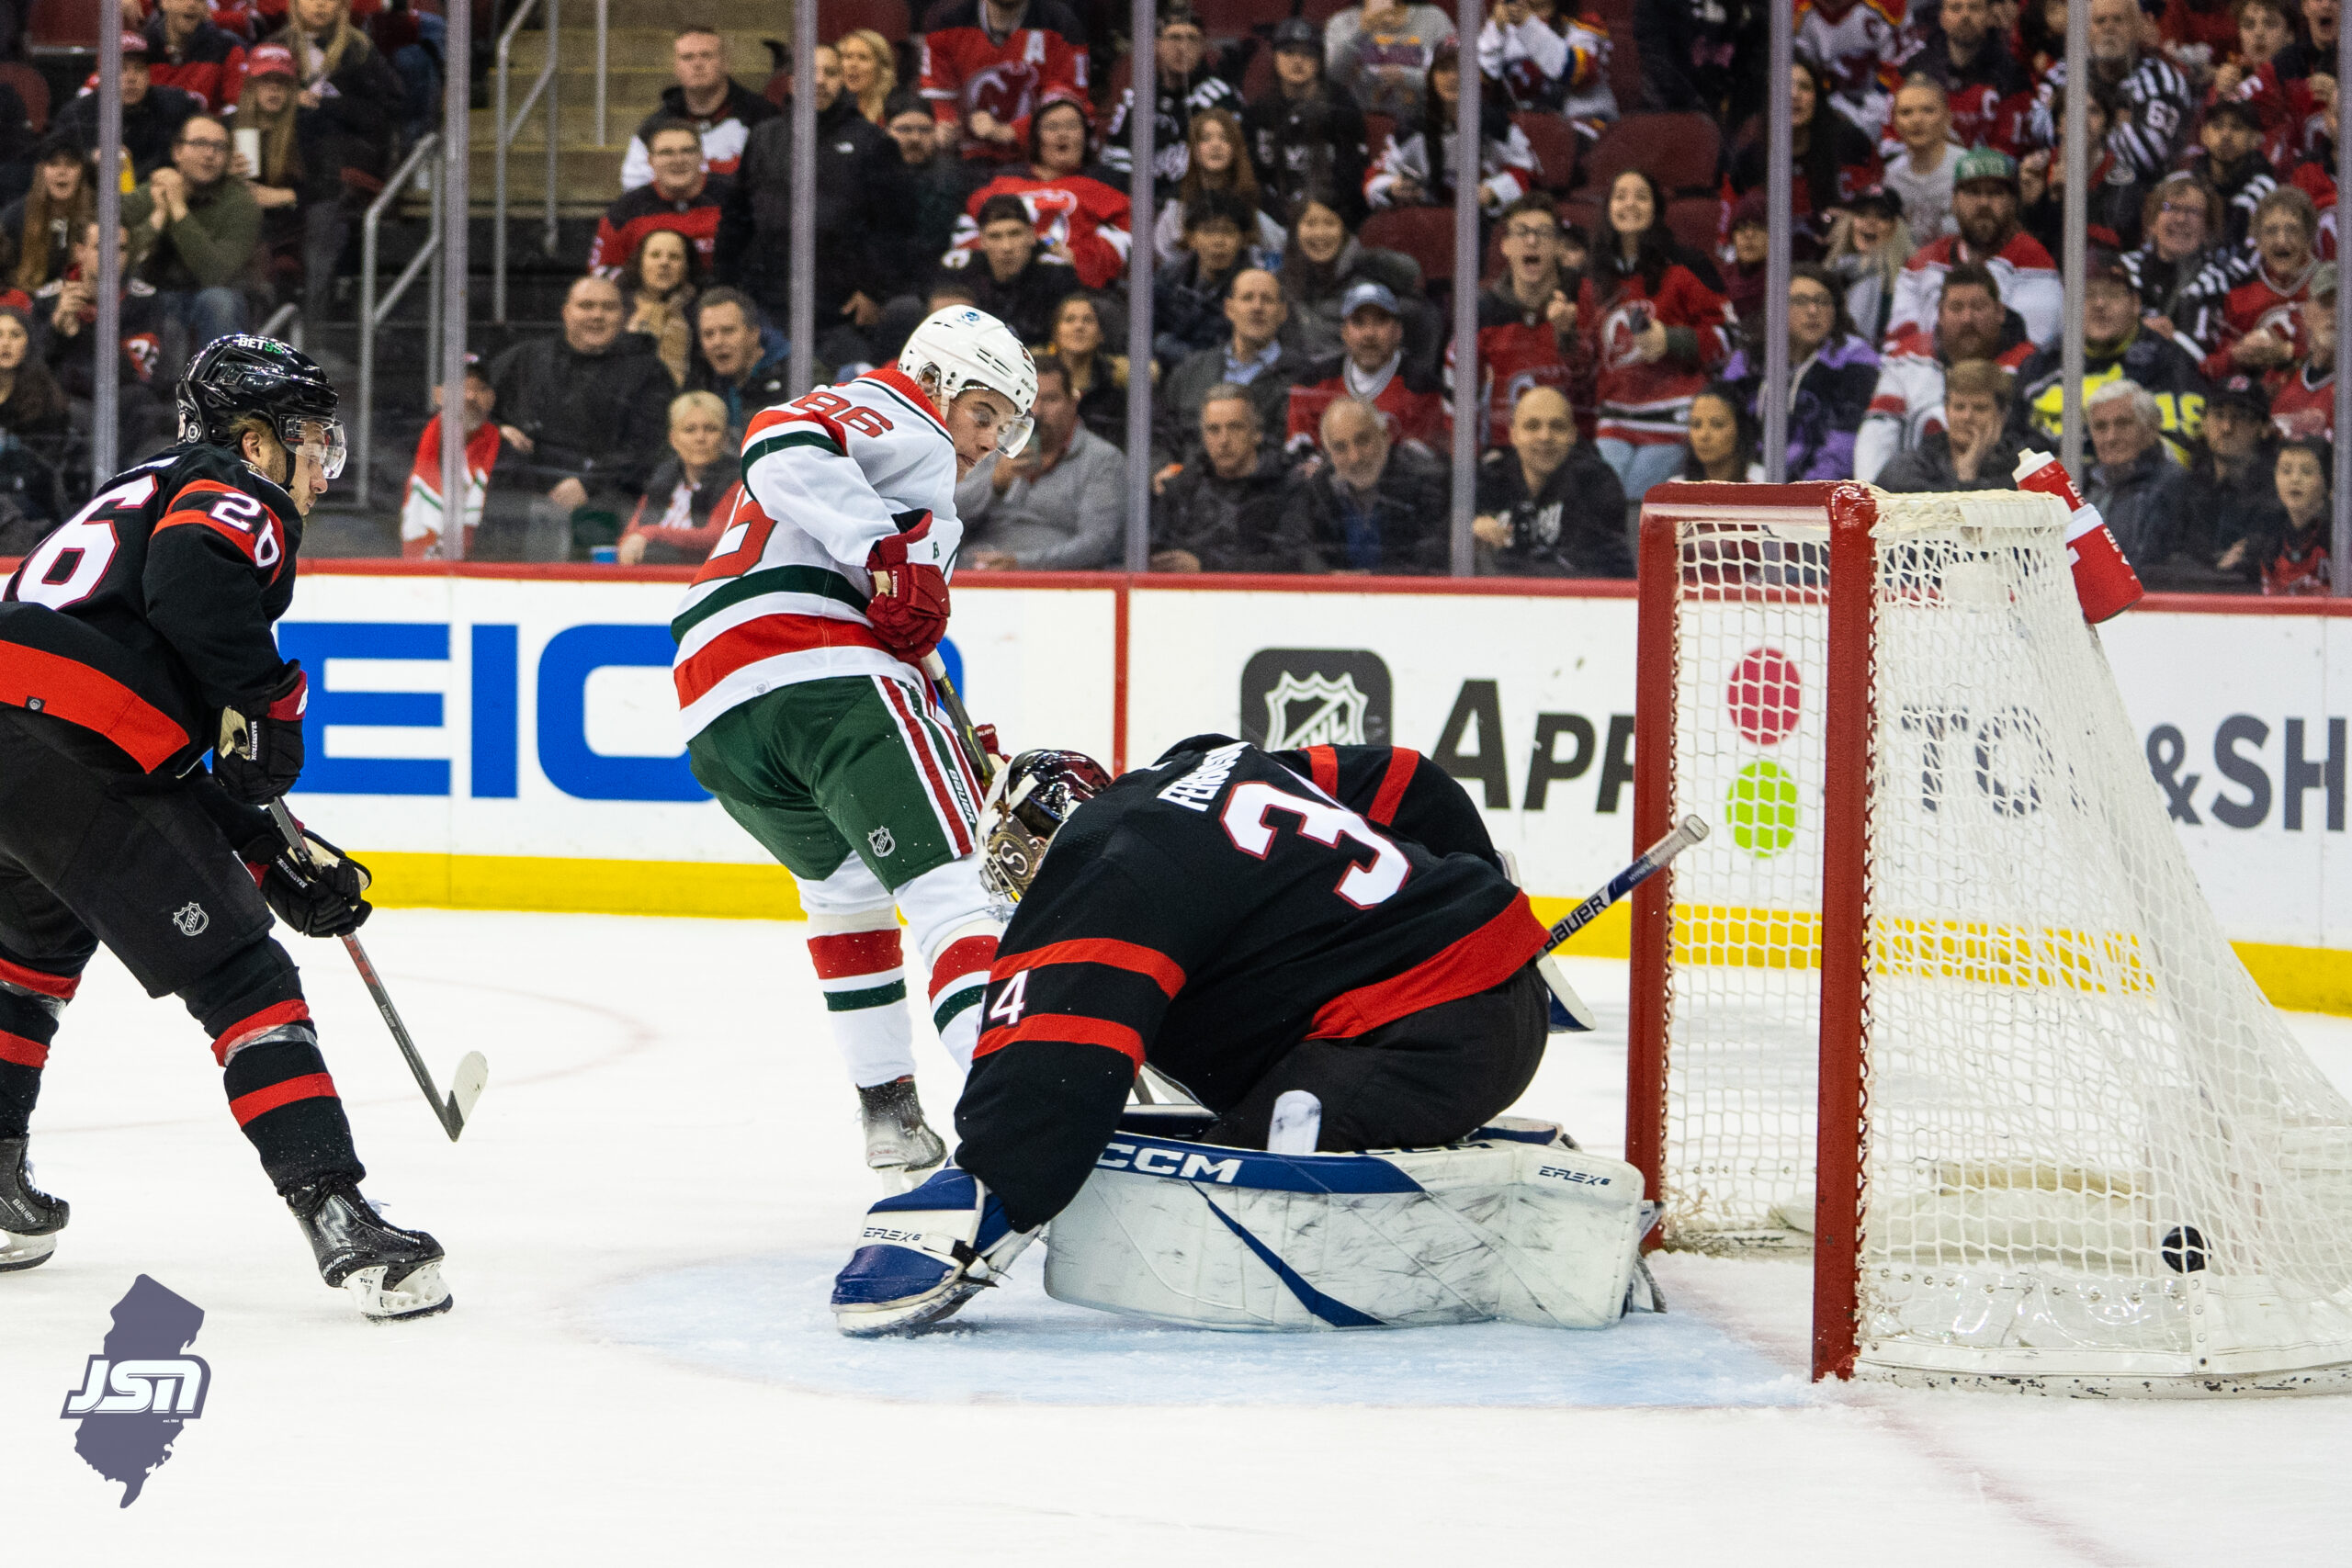 Devils Defeat Senators, Clinch First Playoff Berth in Five Years